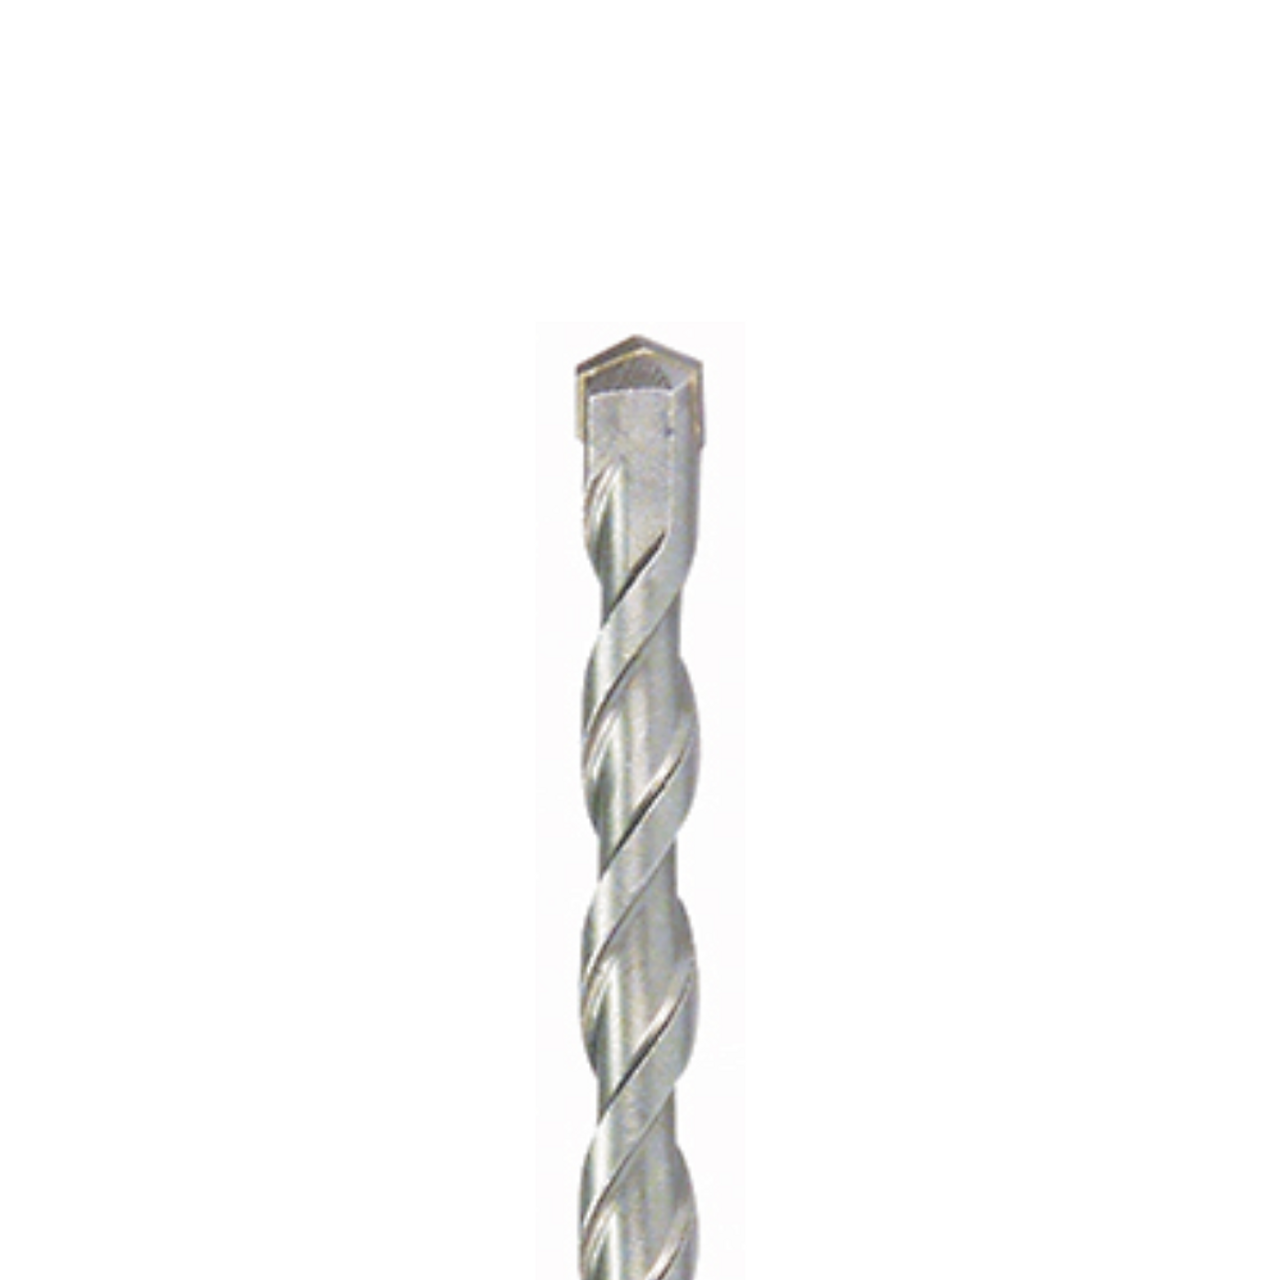 BOHRCRAFT Drill Bits | 2590 ECO Hammer Drill Bits for 150mm Depth for SDS-Plus